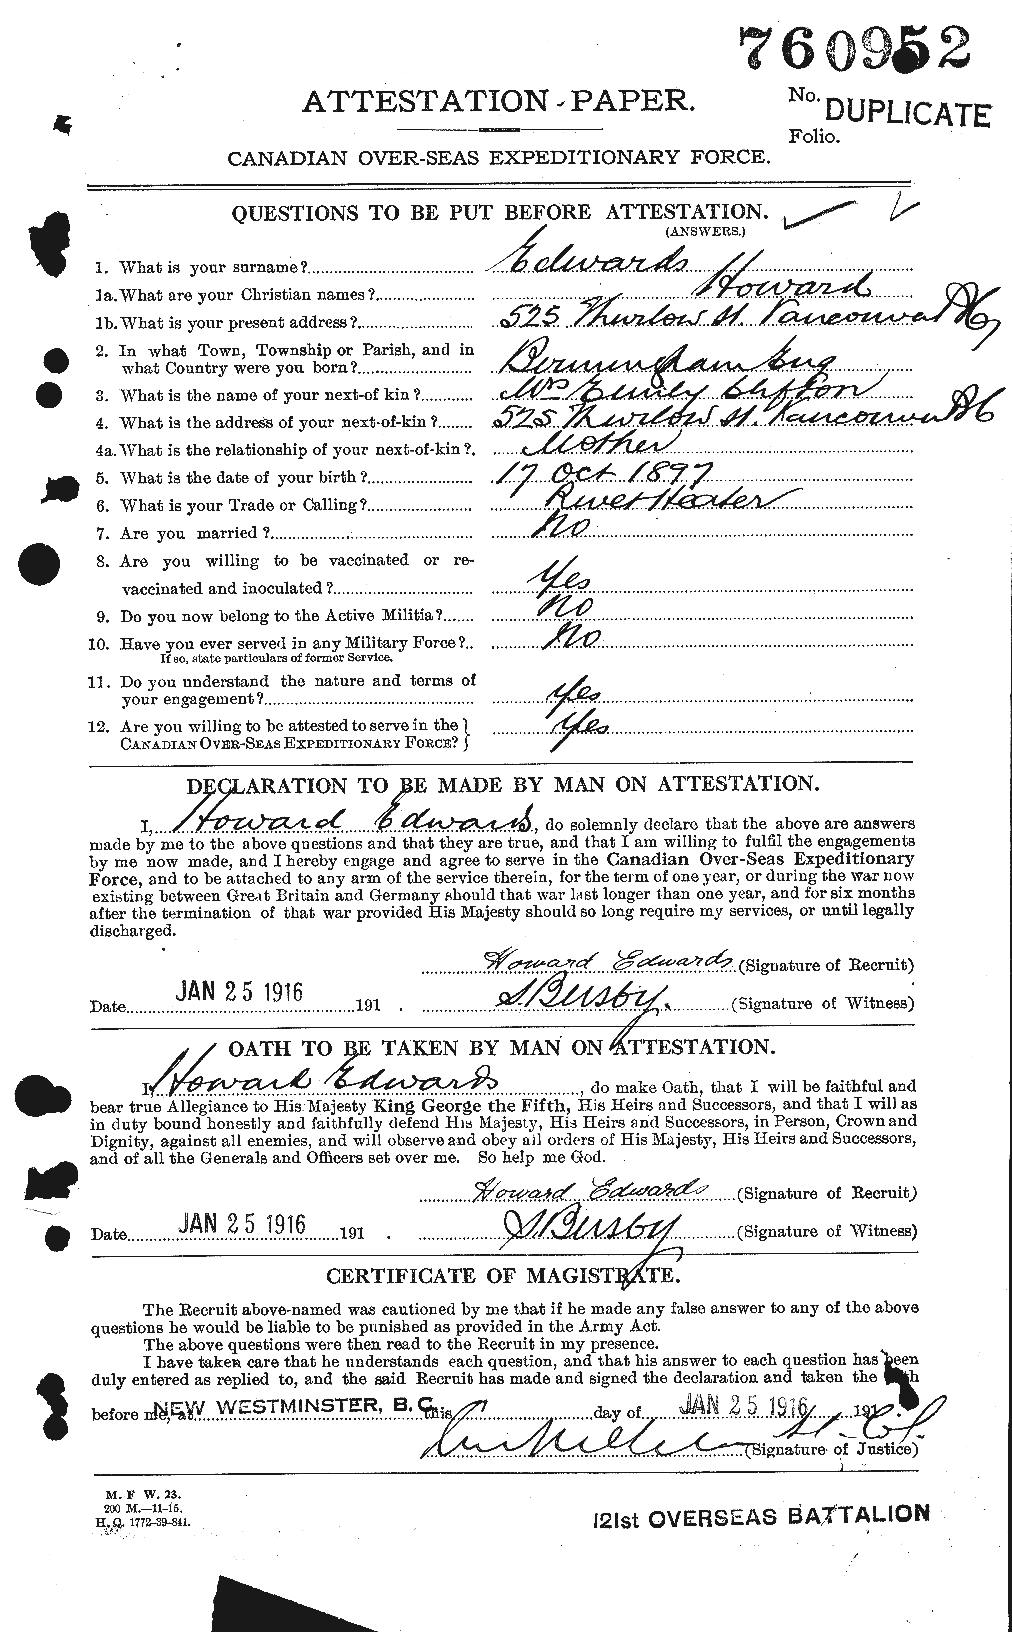 Personnel Records of the First World War - CEF 309789a